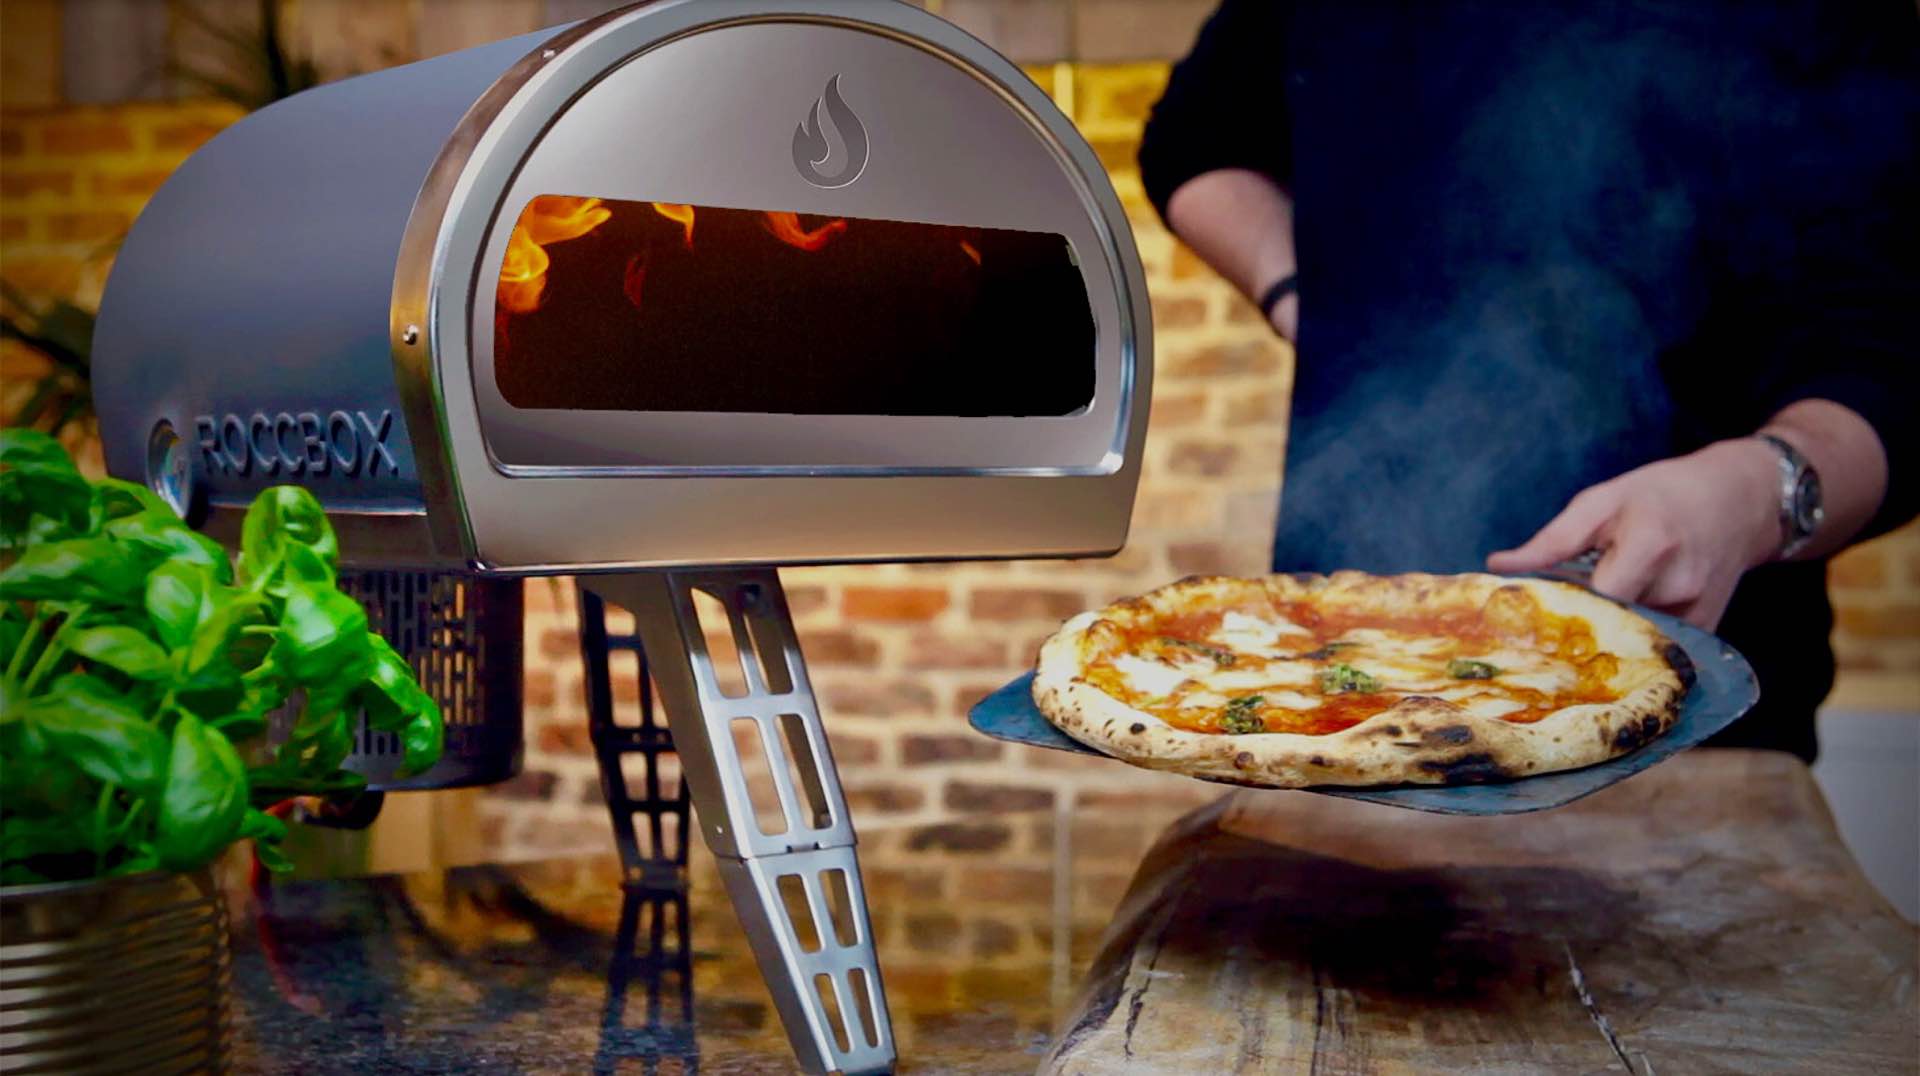 The Roccbox outdoor pizza oven. ($599 + $49 shipping)